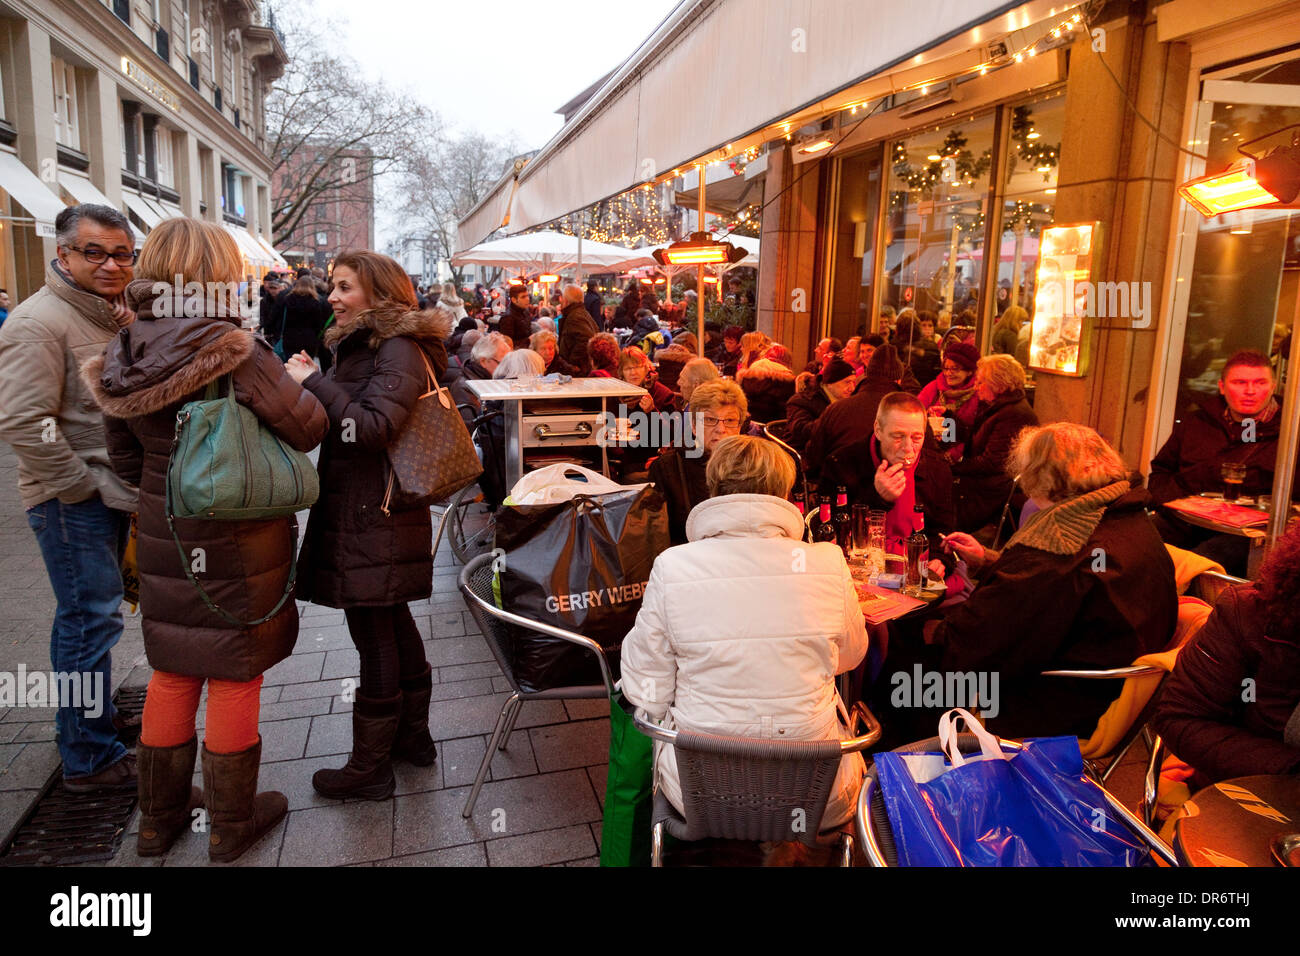 People sitting eating and drinking at a street cafe, Cologne ( Koln ), Germany Europe Stock Photo